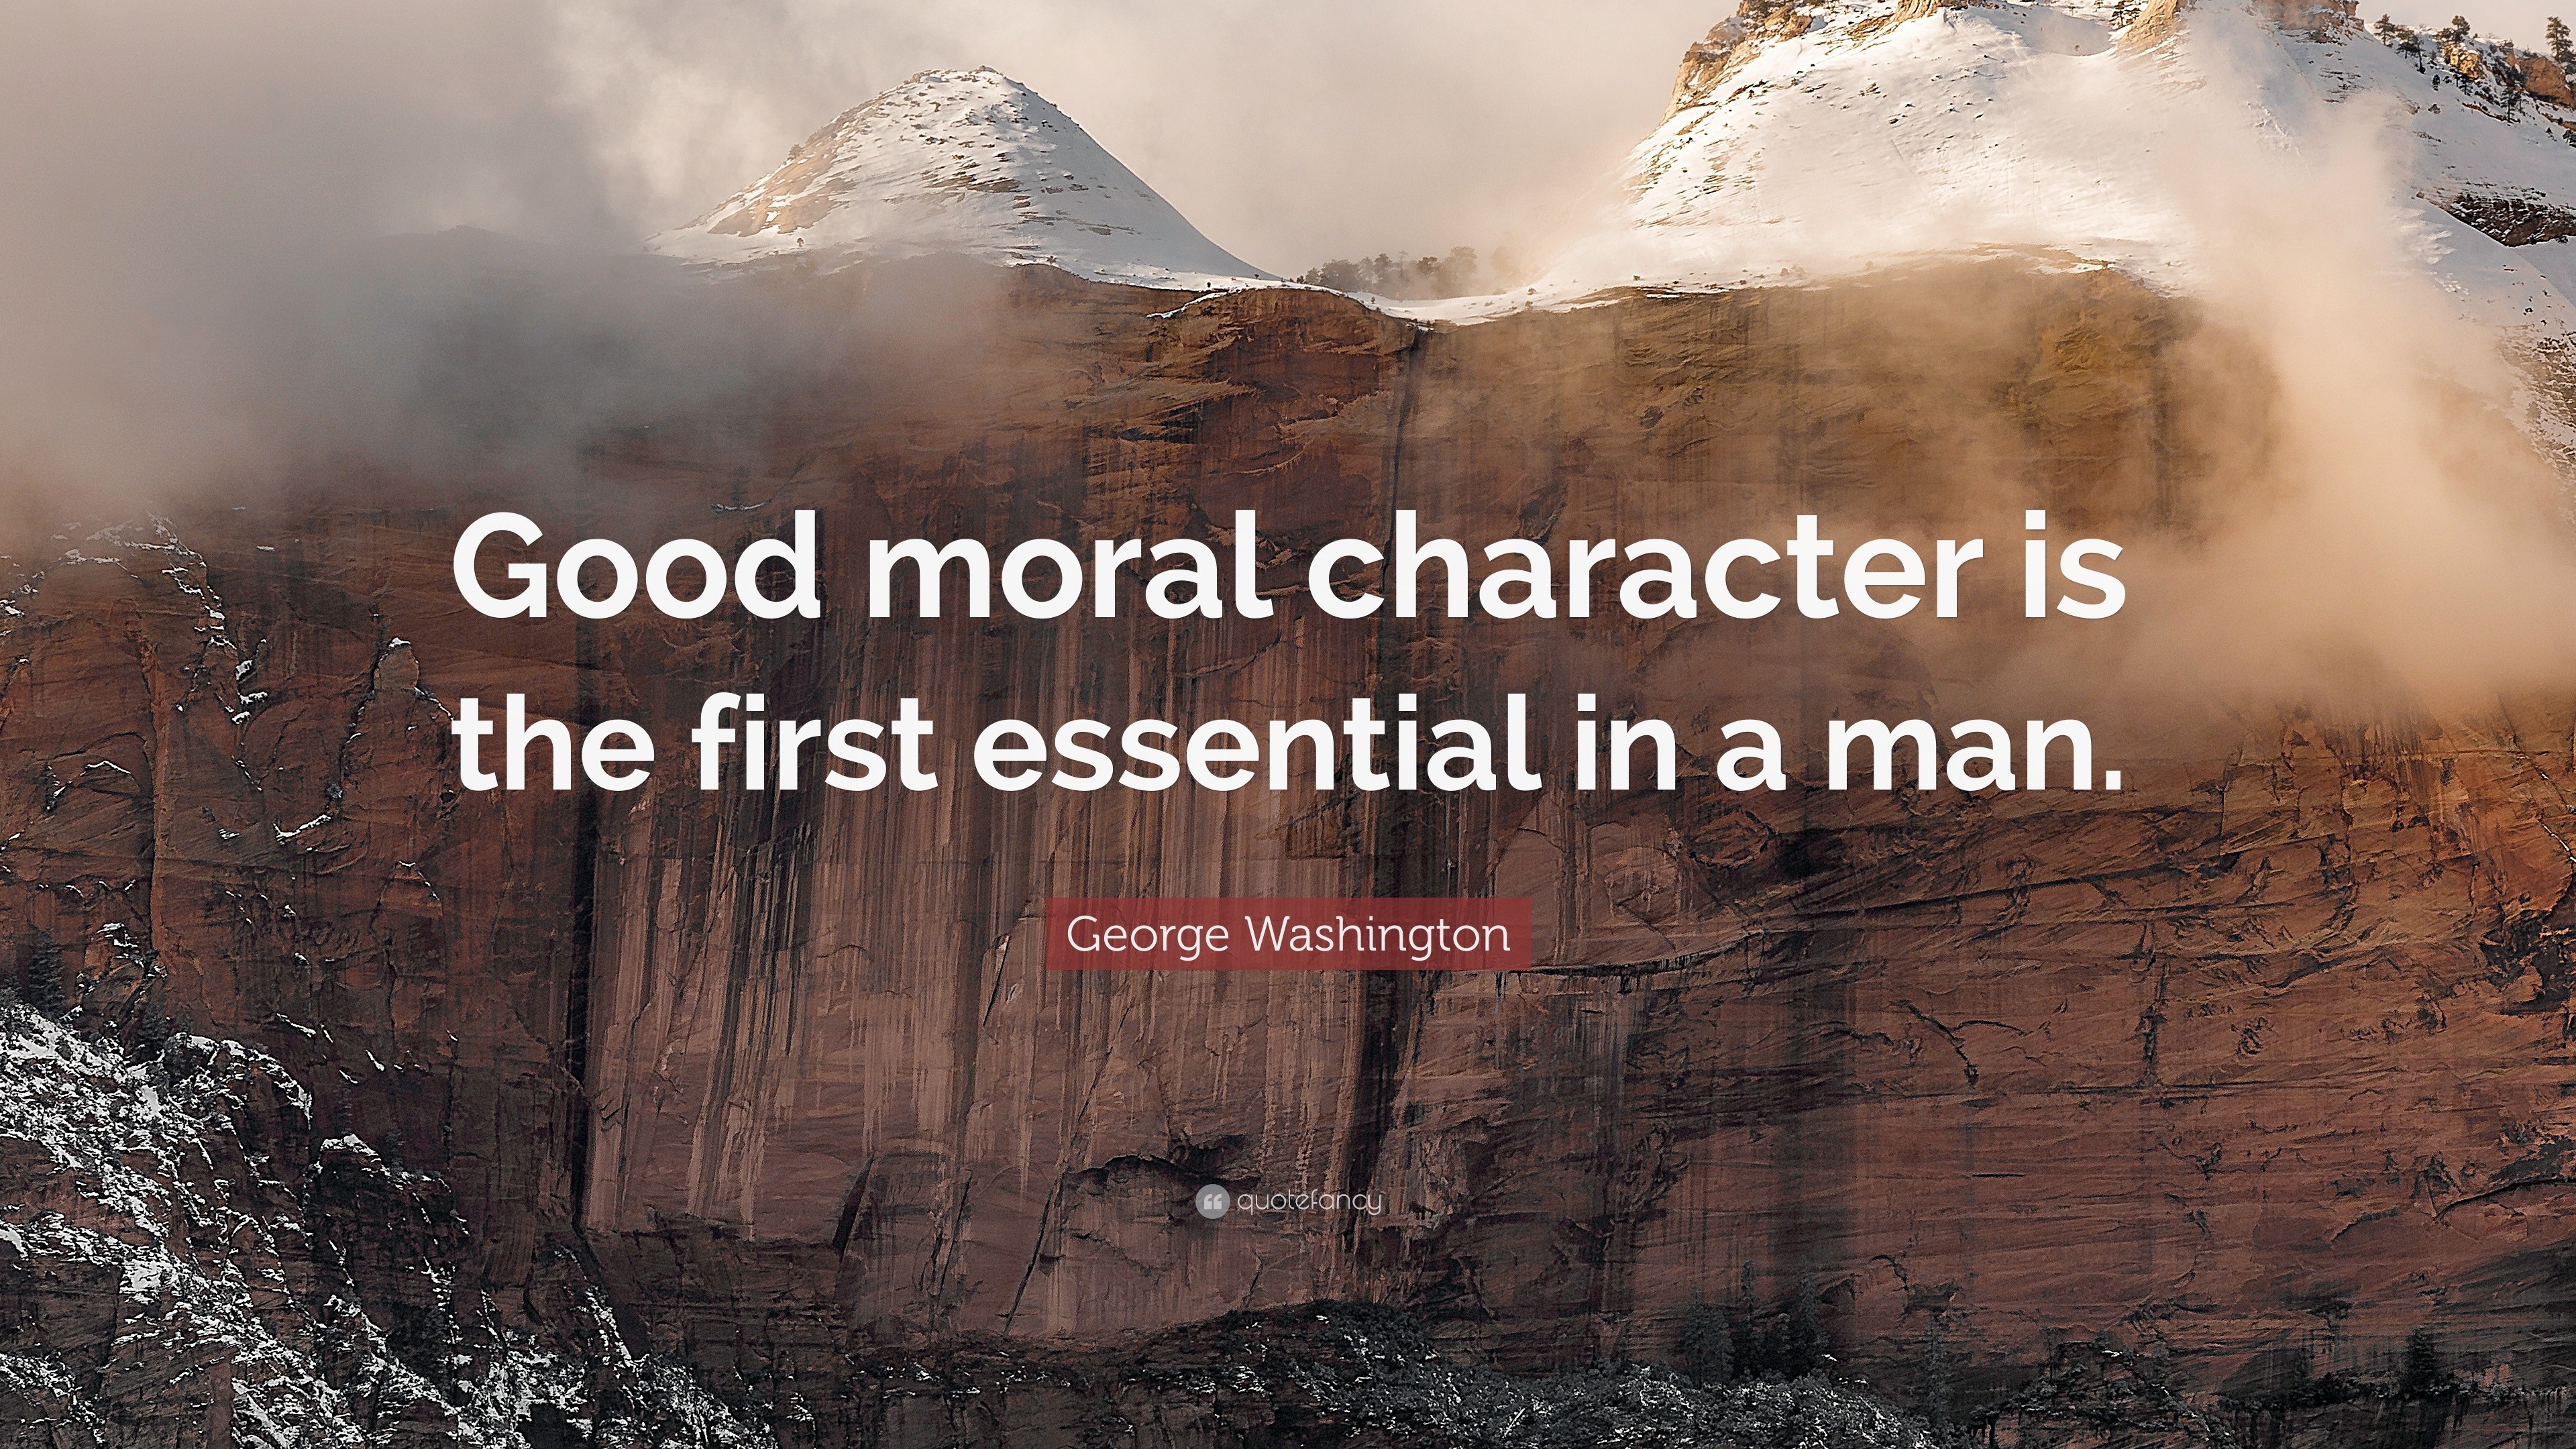 George Washington Quote: “Good moral character is the first essential